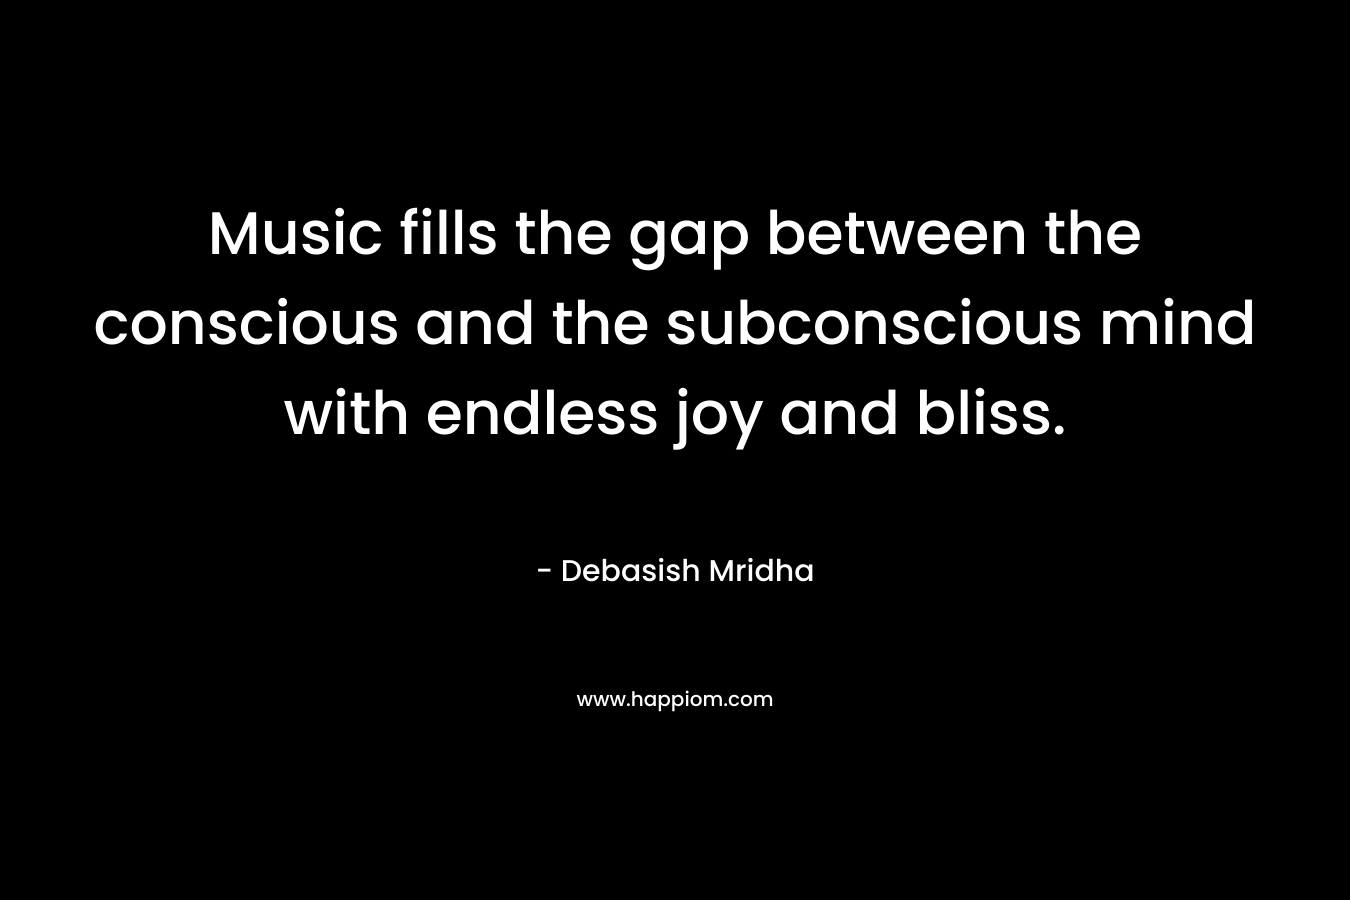 Music fills the gap between the conscious and the subconscious mind with endless joy and bliss.